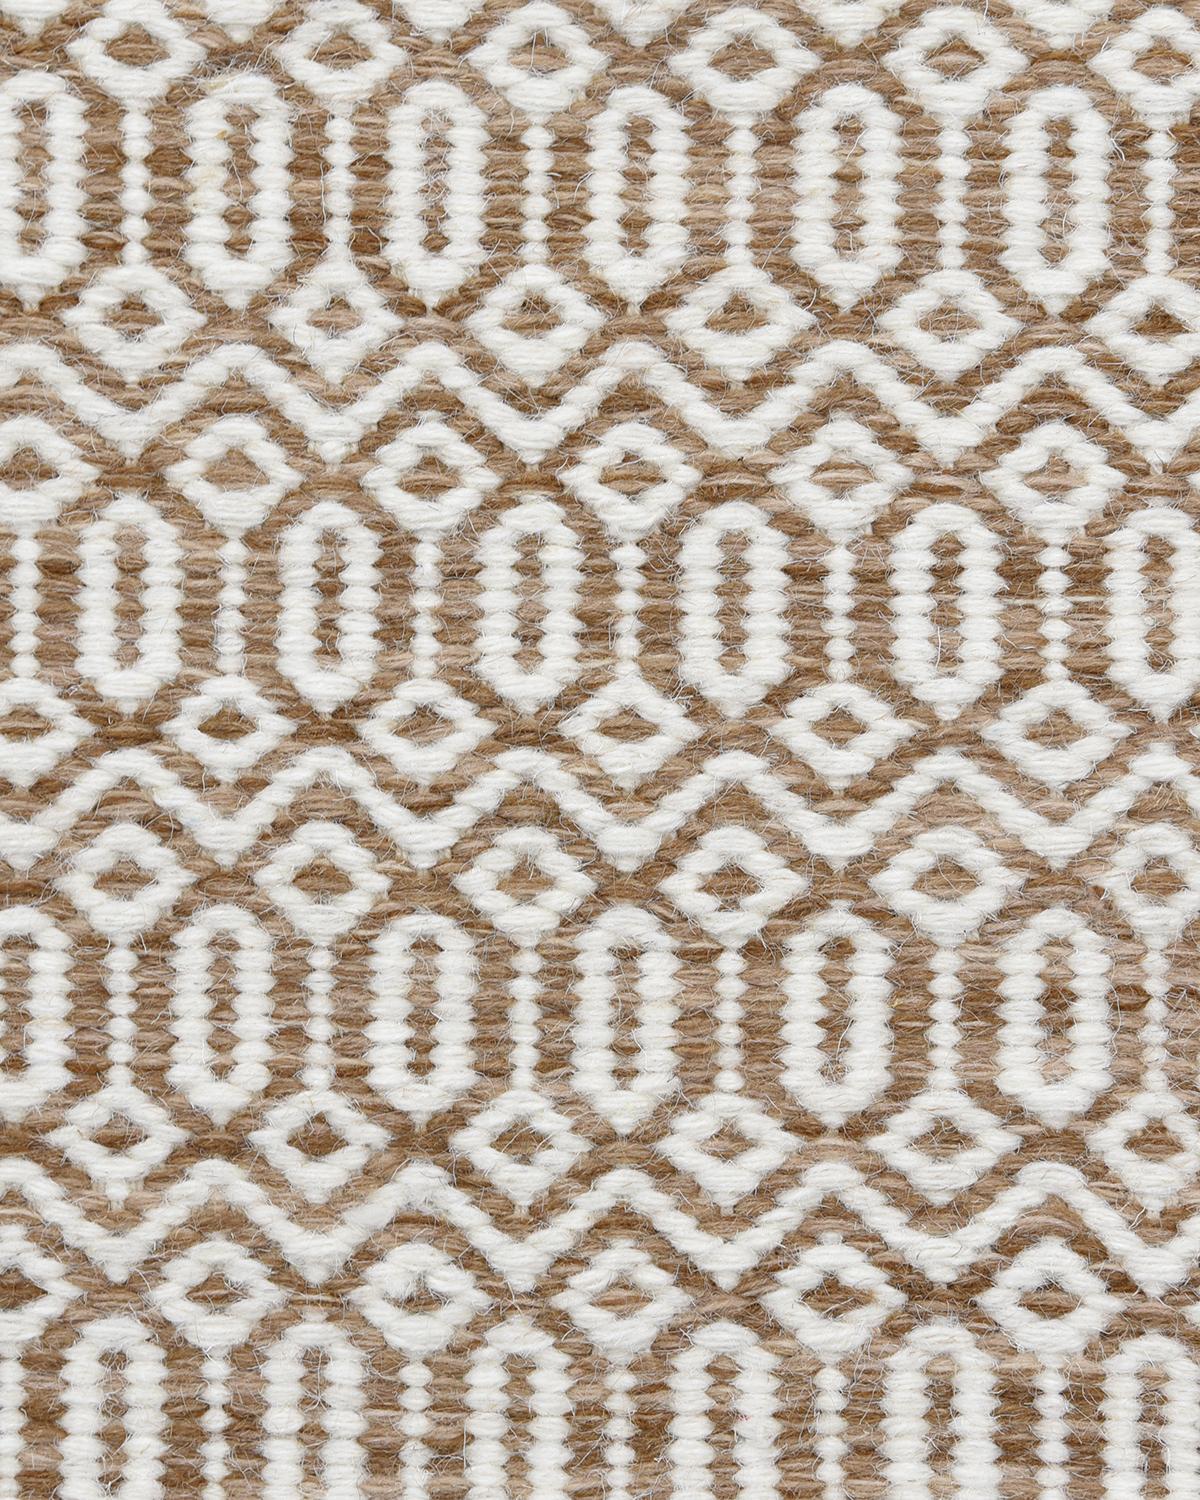 Modern Solo Rugs Chatham Contemporary Geometric Handmade Area Rug Brown